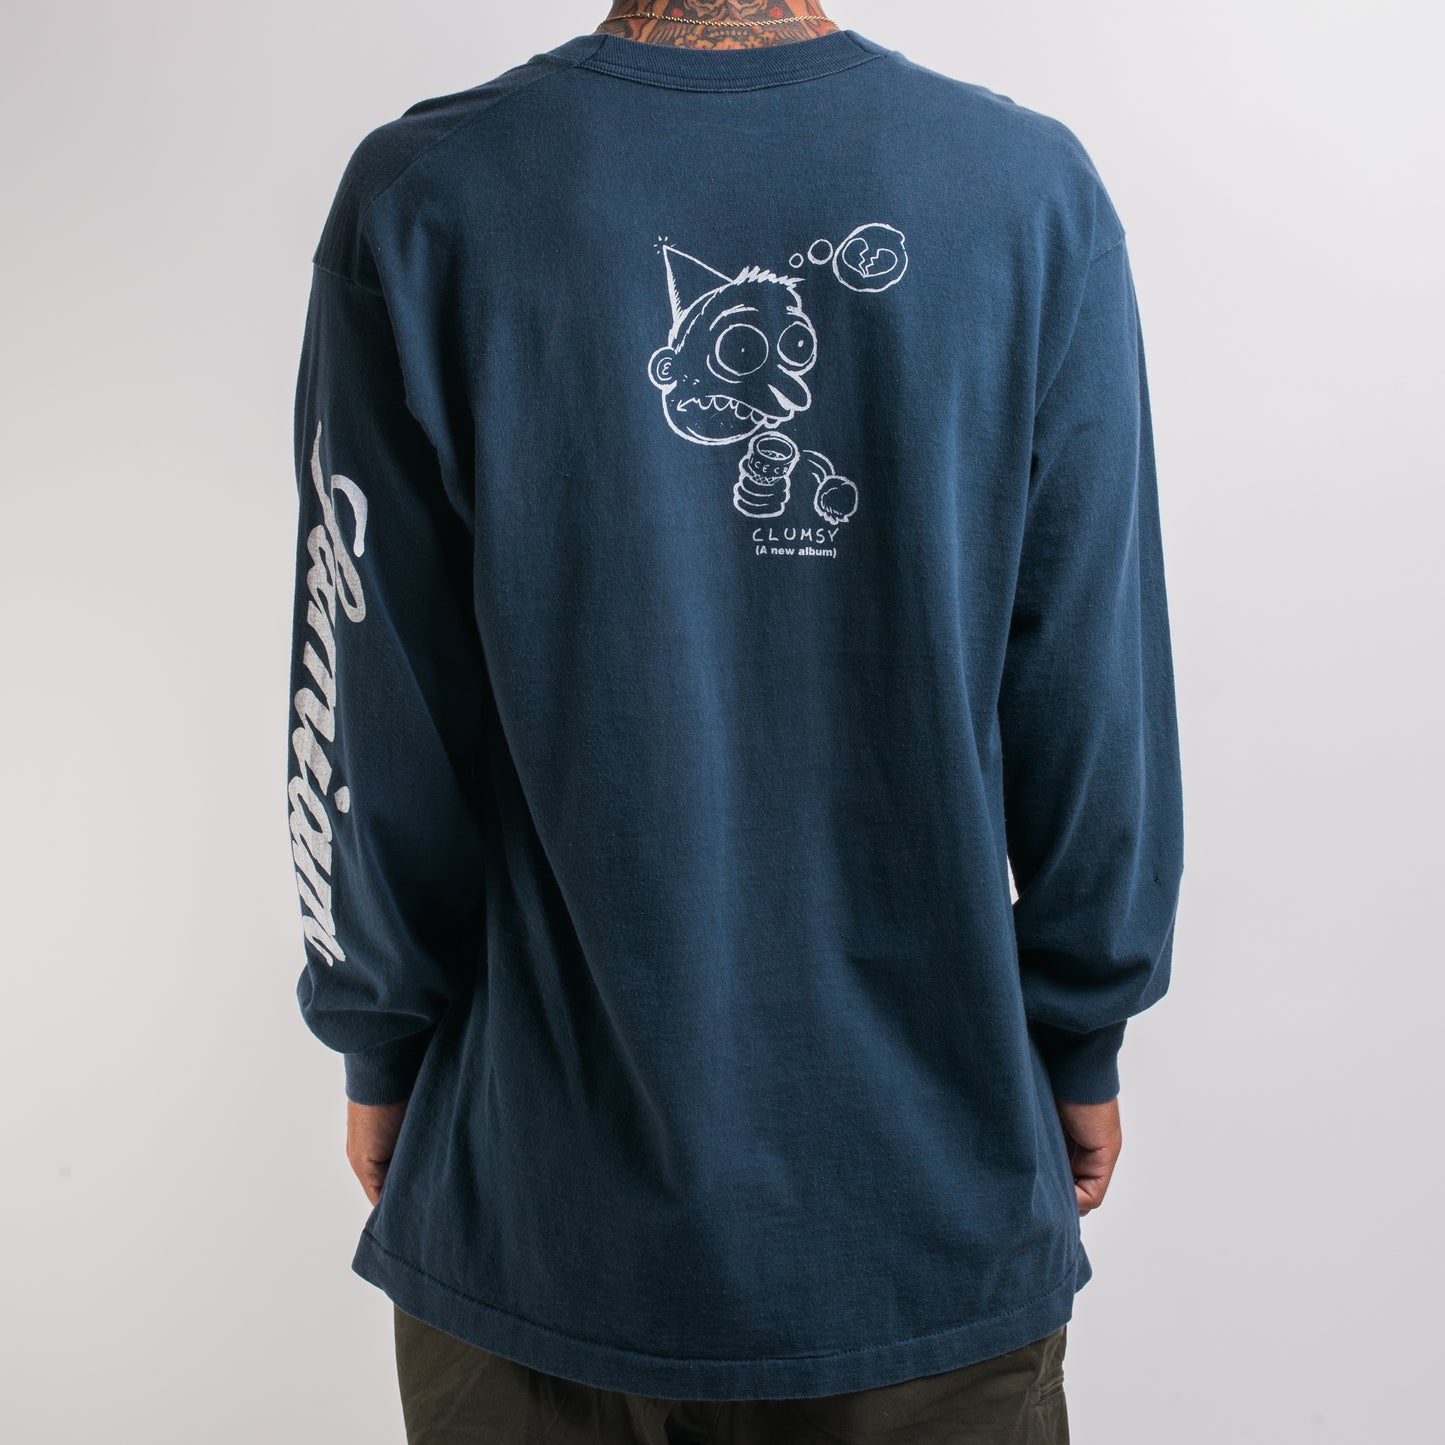 Vintage 90’s Samiam Clumsy Longsleeve